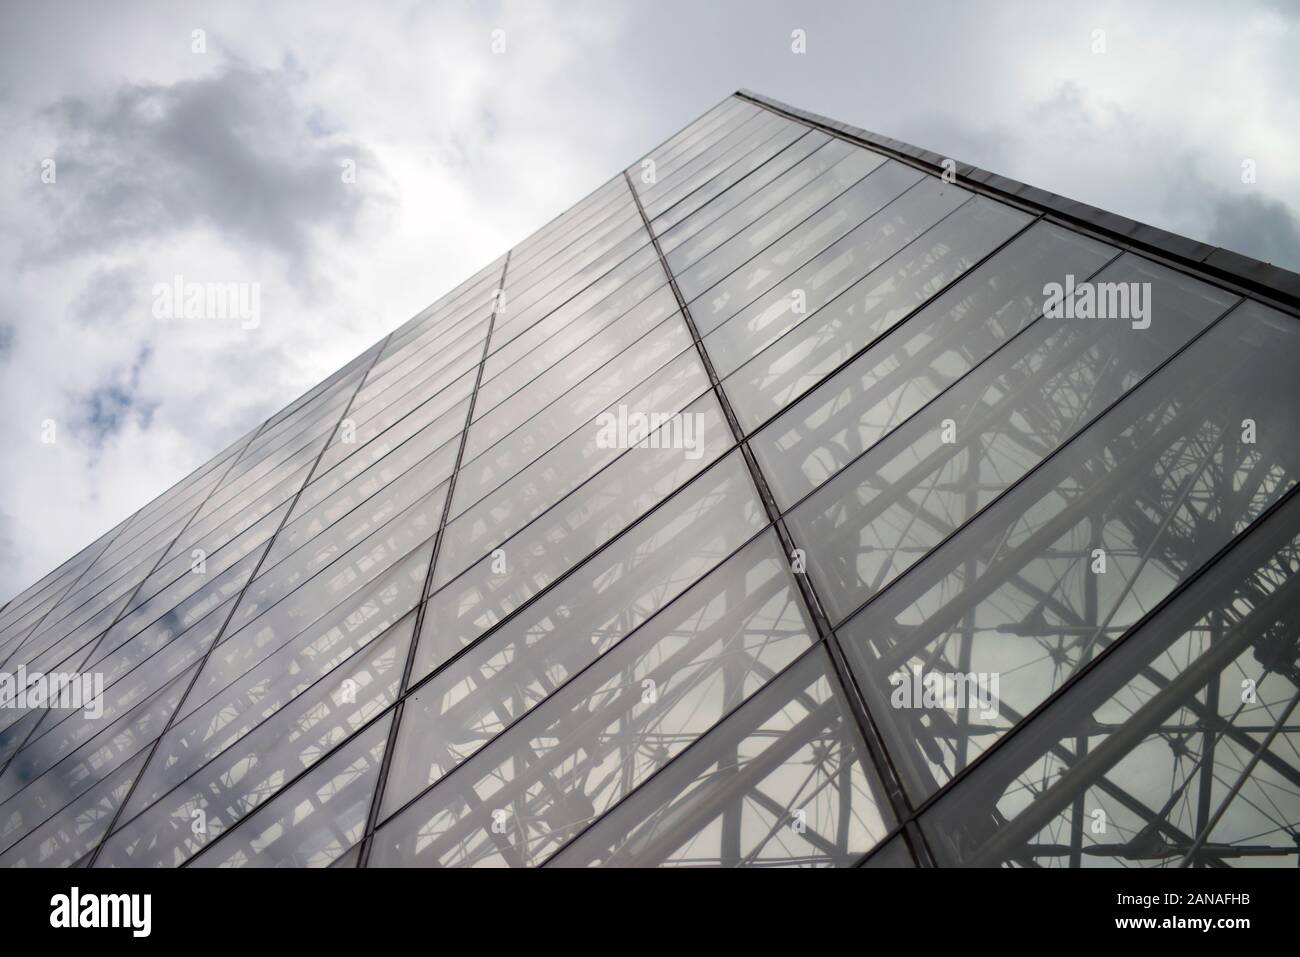 Illuminated glass pyramid at the Louvre, Paris. Louvre museum pyramid. the world's largest art museum and a historic monument Stock Photo